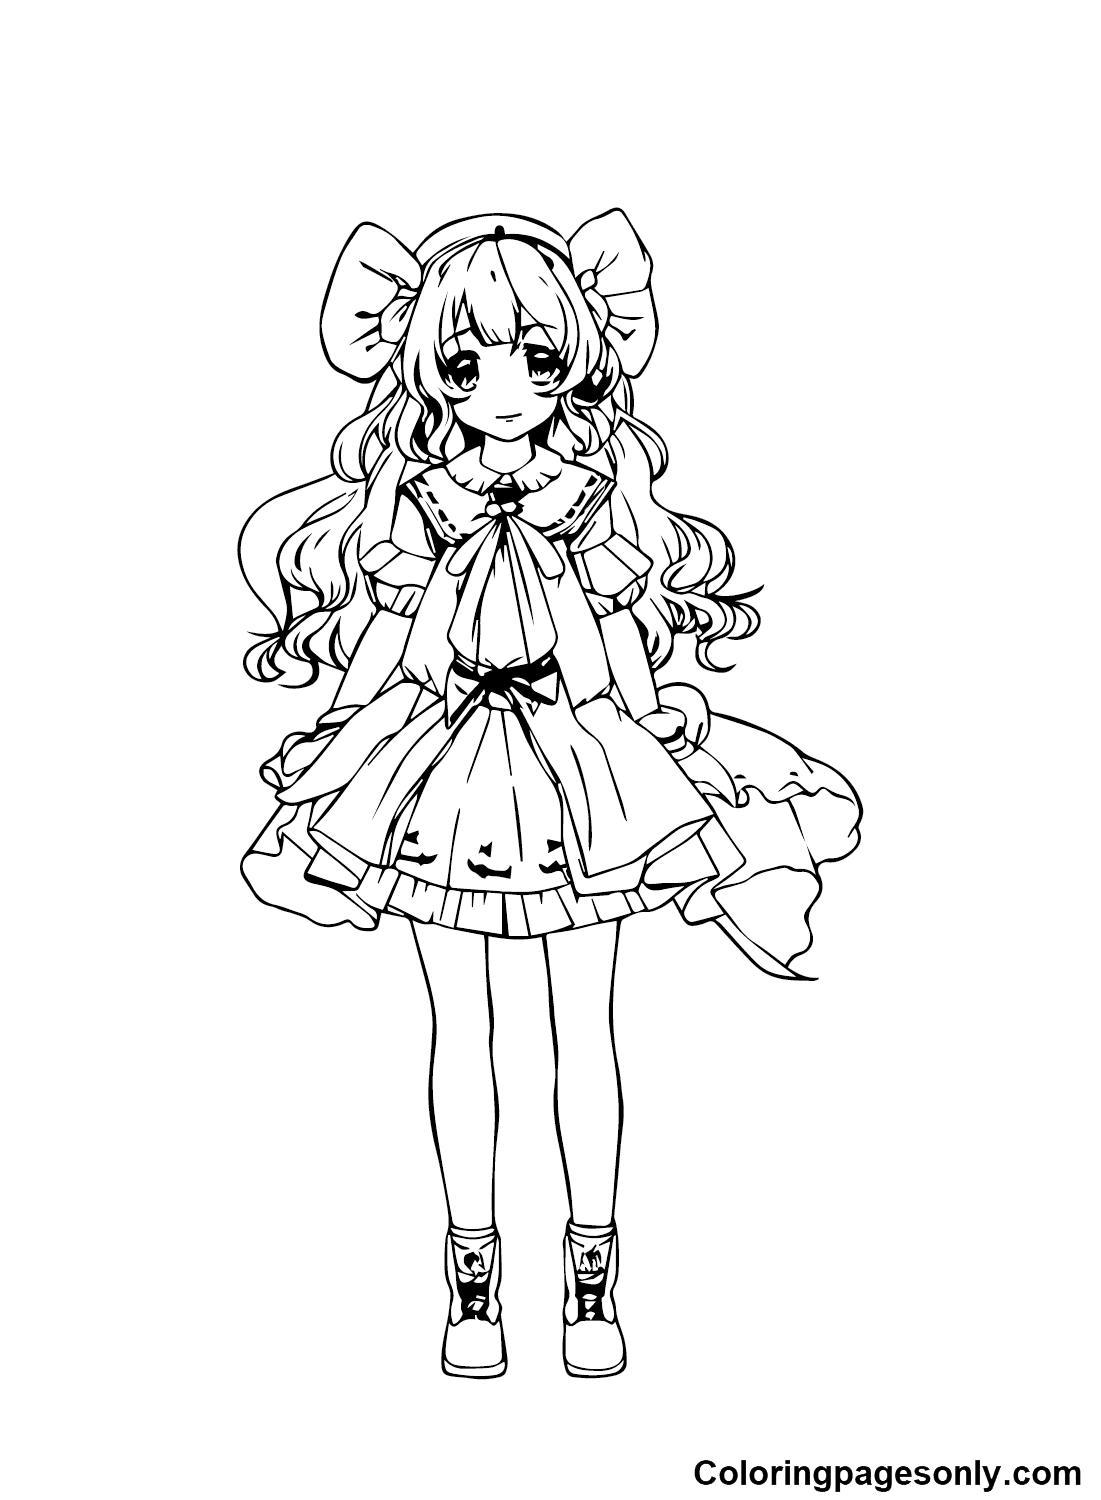 Cute Anime Girls Coloring Page